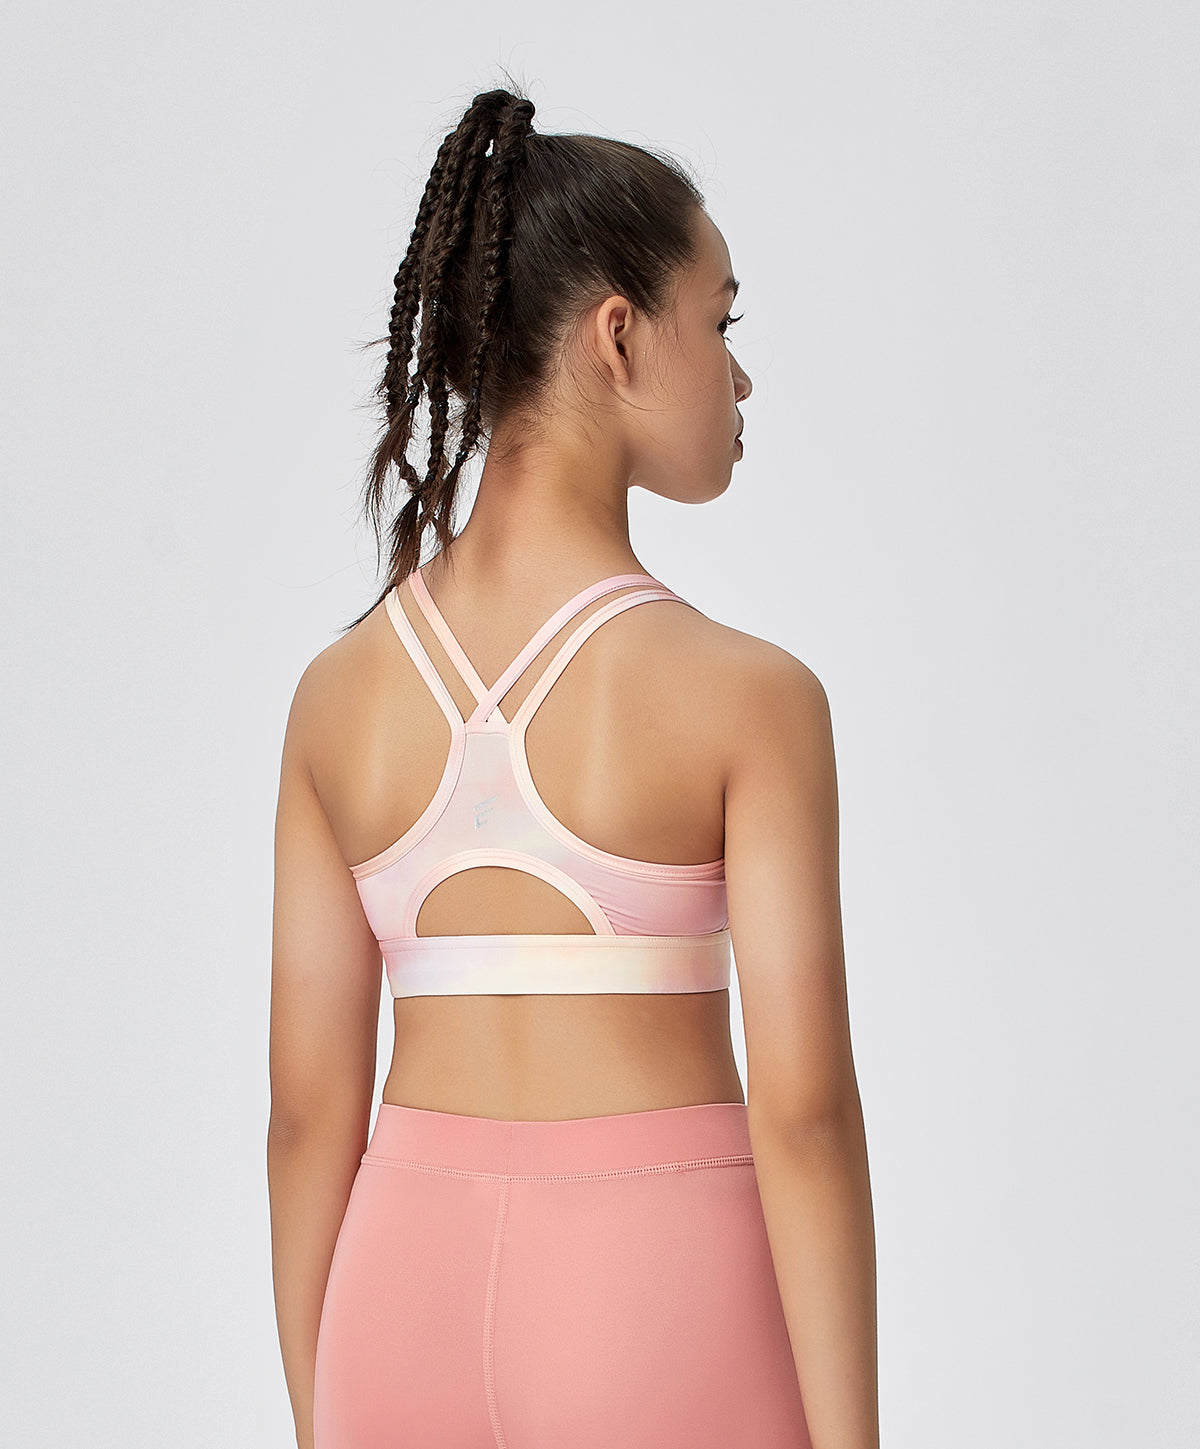 Sunway Velocity Mall - Energized Sports Bra at RM1??! YES no doubt, we are  selling all sports bra at RM1*/pc with purchase of Pierre Cardin Lingerie  Malaysia Ballerina sports bra. Promotion valid